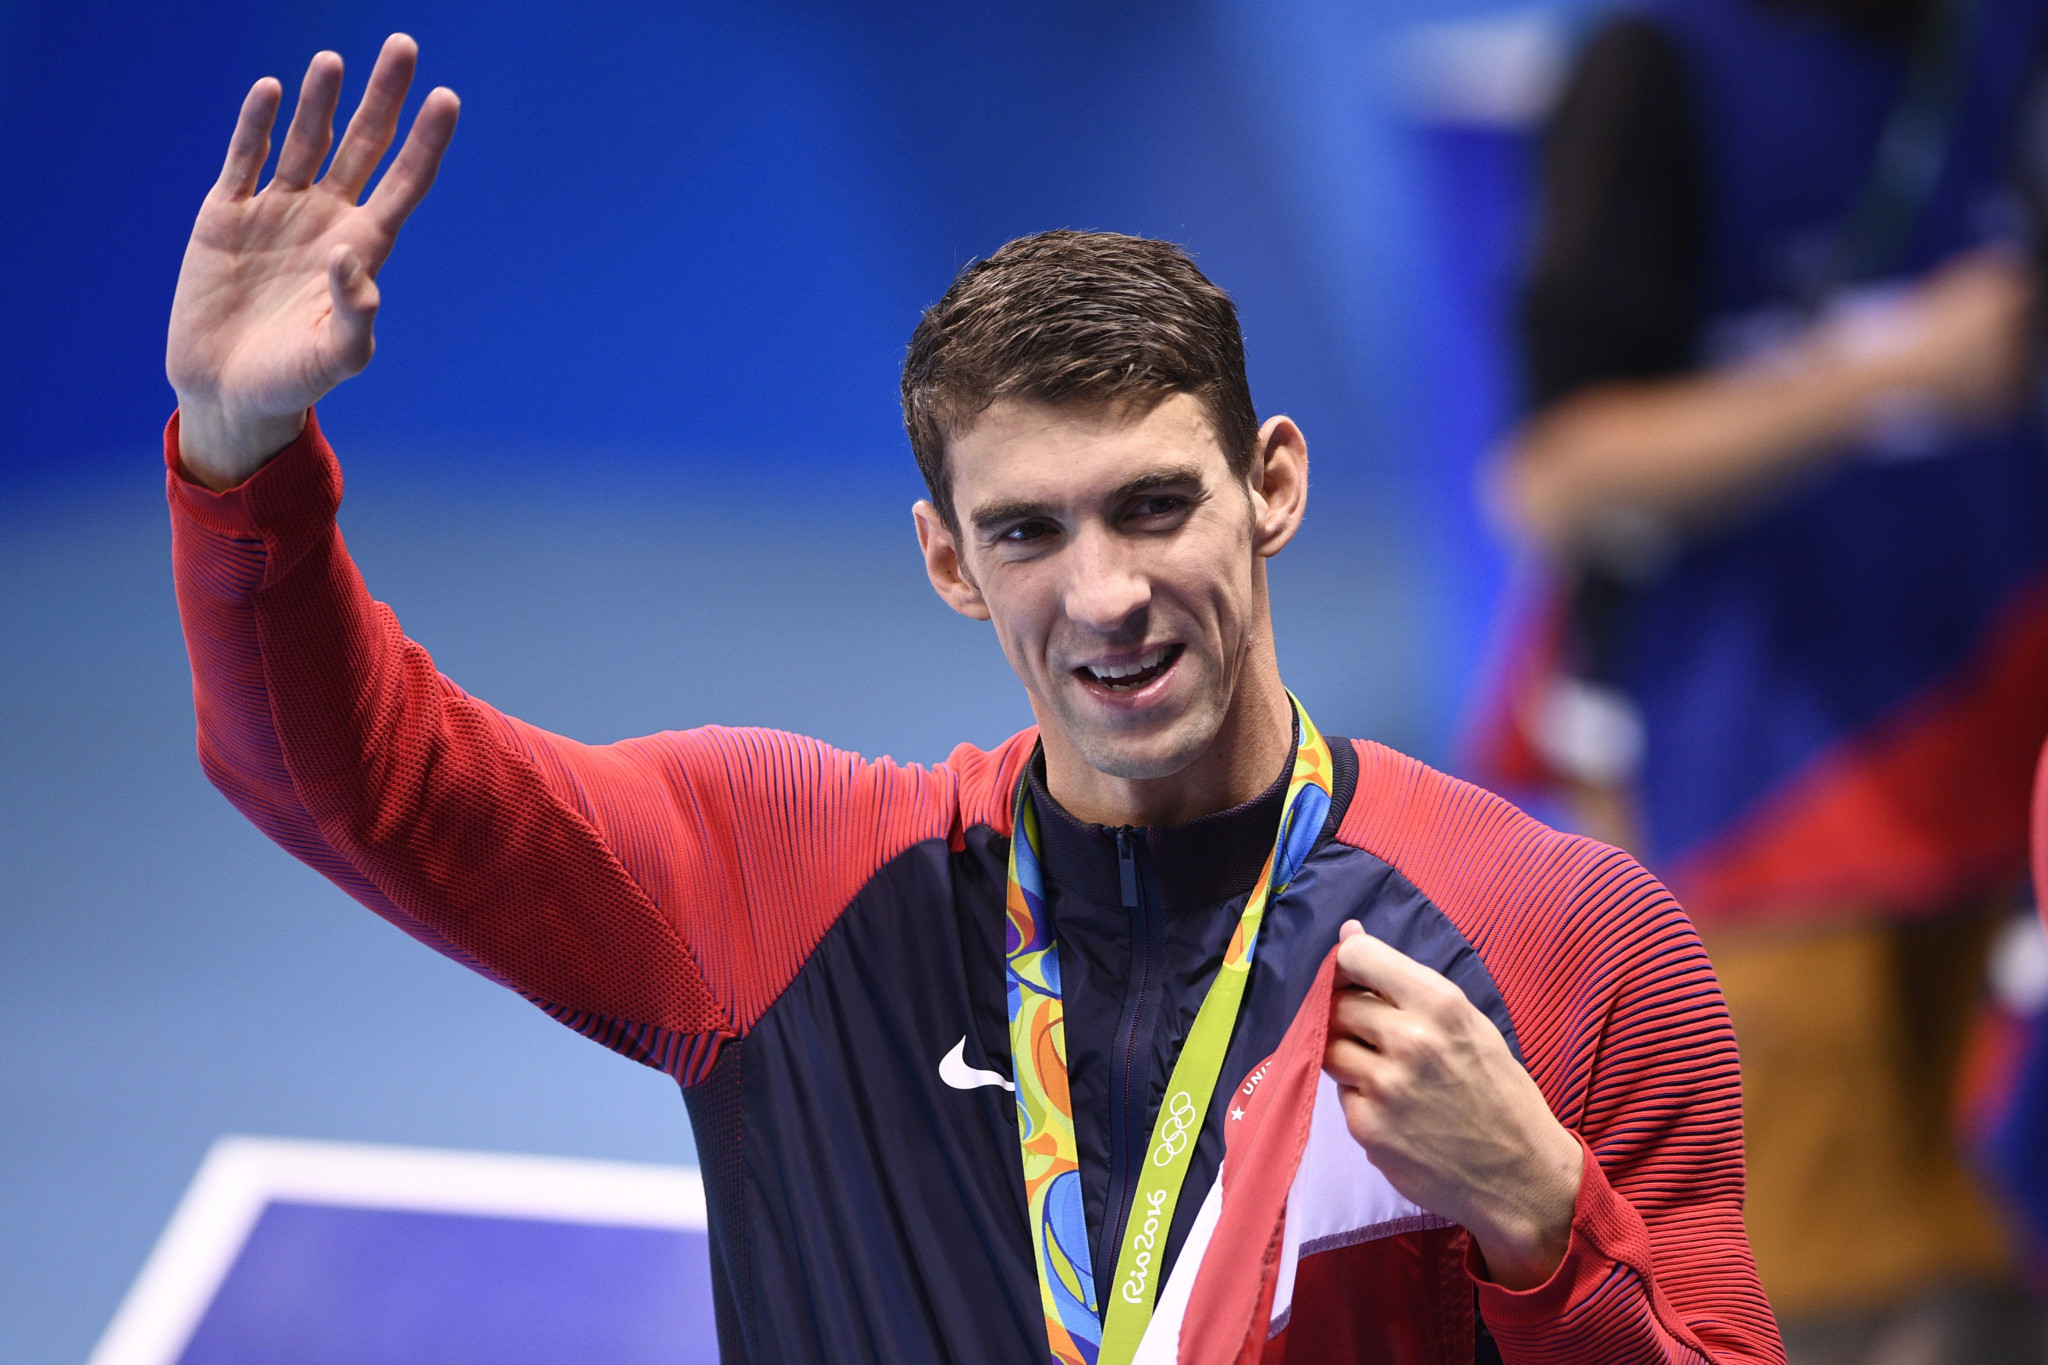 Michael Phelps won an Olympic record 28 medals for the United States ©Getty Images